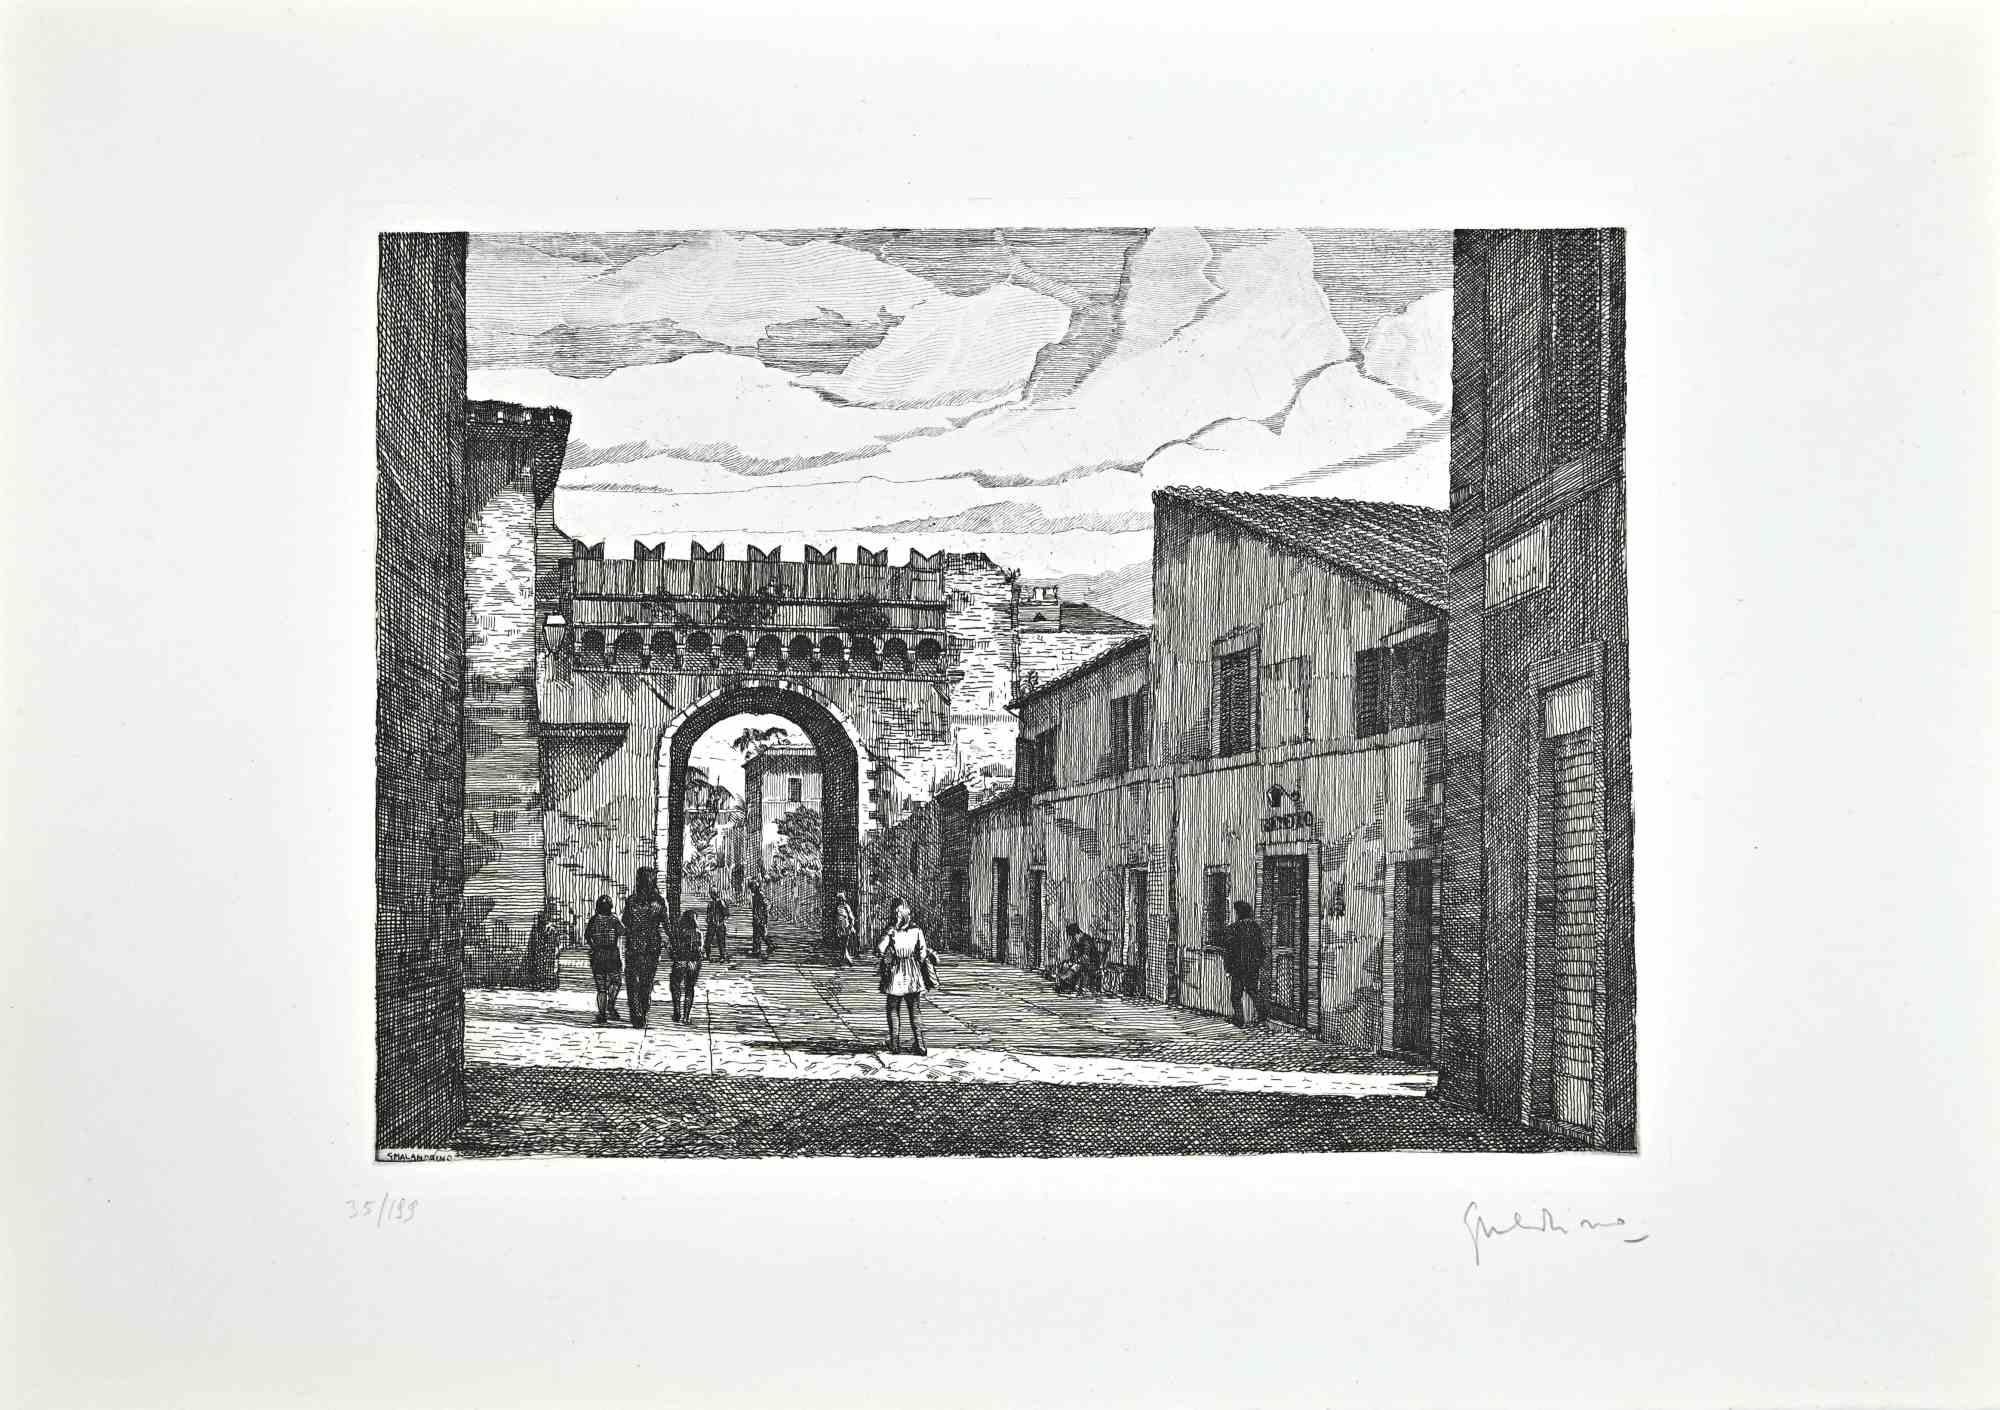 Roman View is an artwork realized by Giuseppe Malandrino.

Print in etching technique and hand watercolored.

Hand-signed by the artist in pencil on the lower right corner.

Numbered edition,35/199.

Good condition.

This artwork represents the